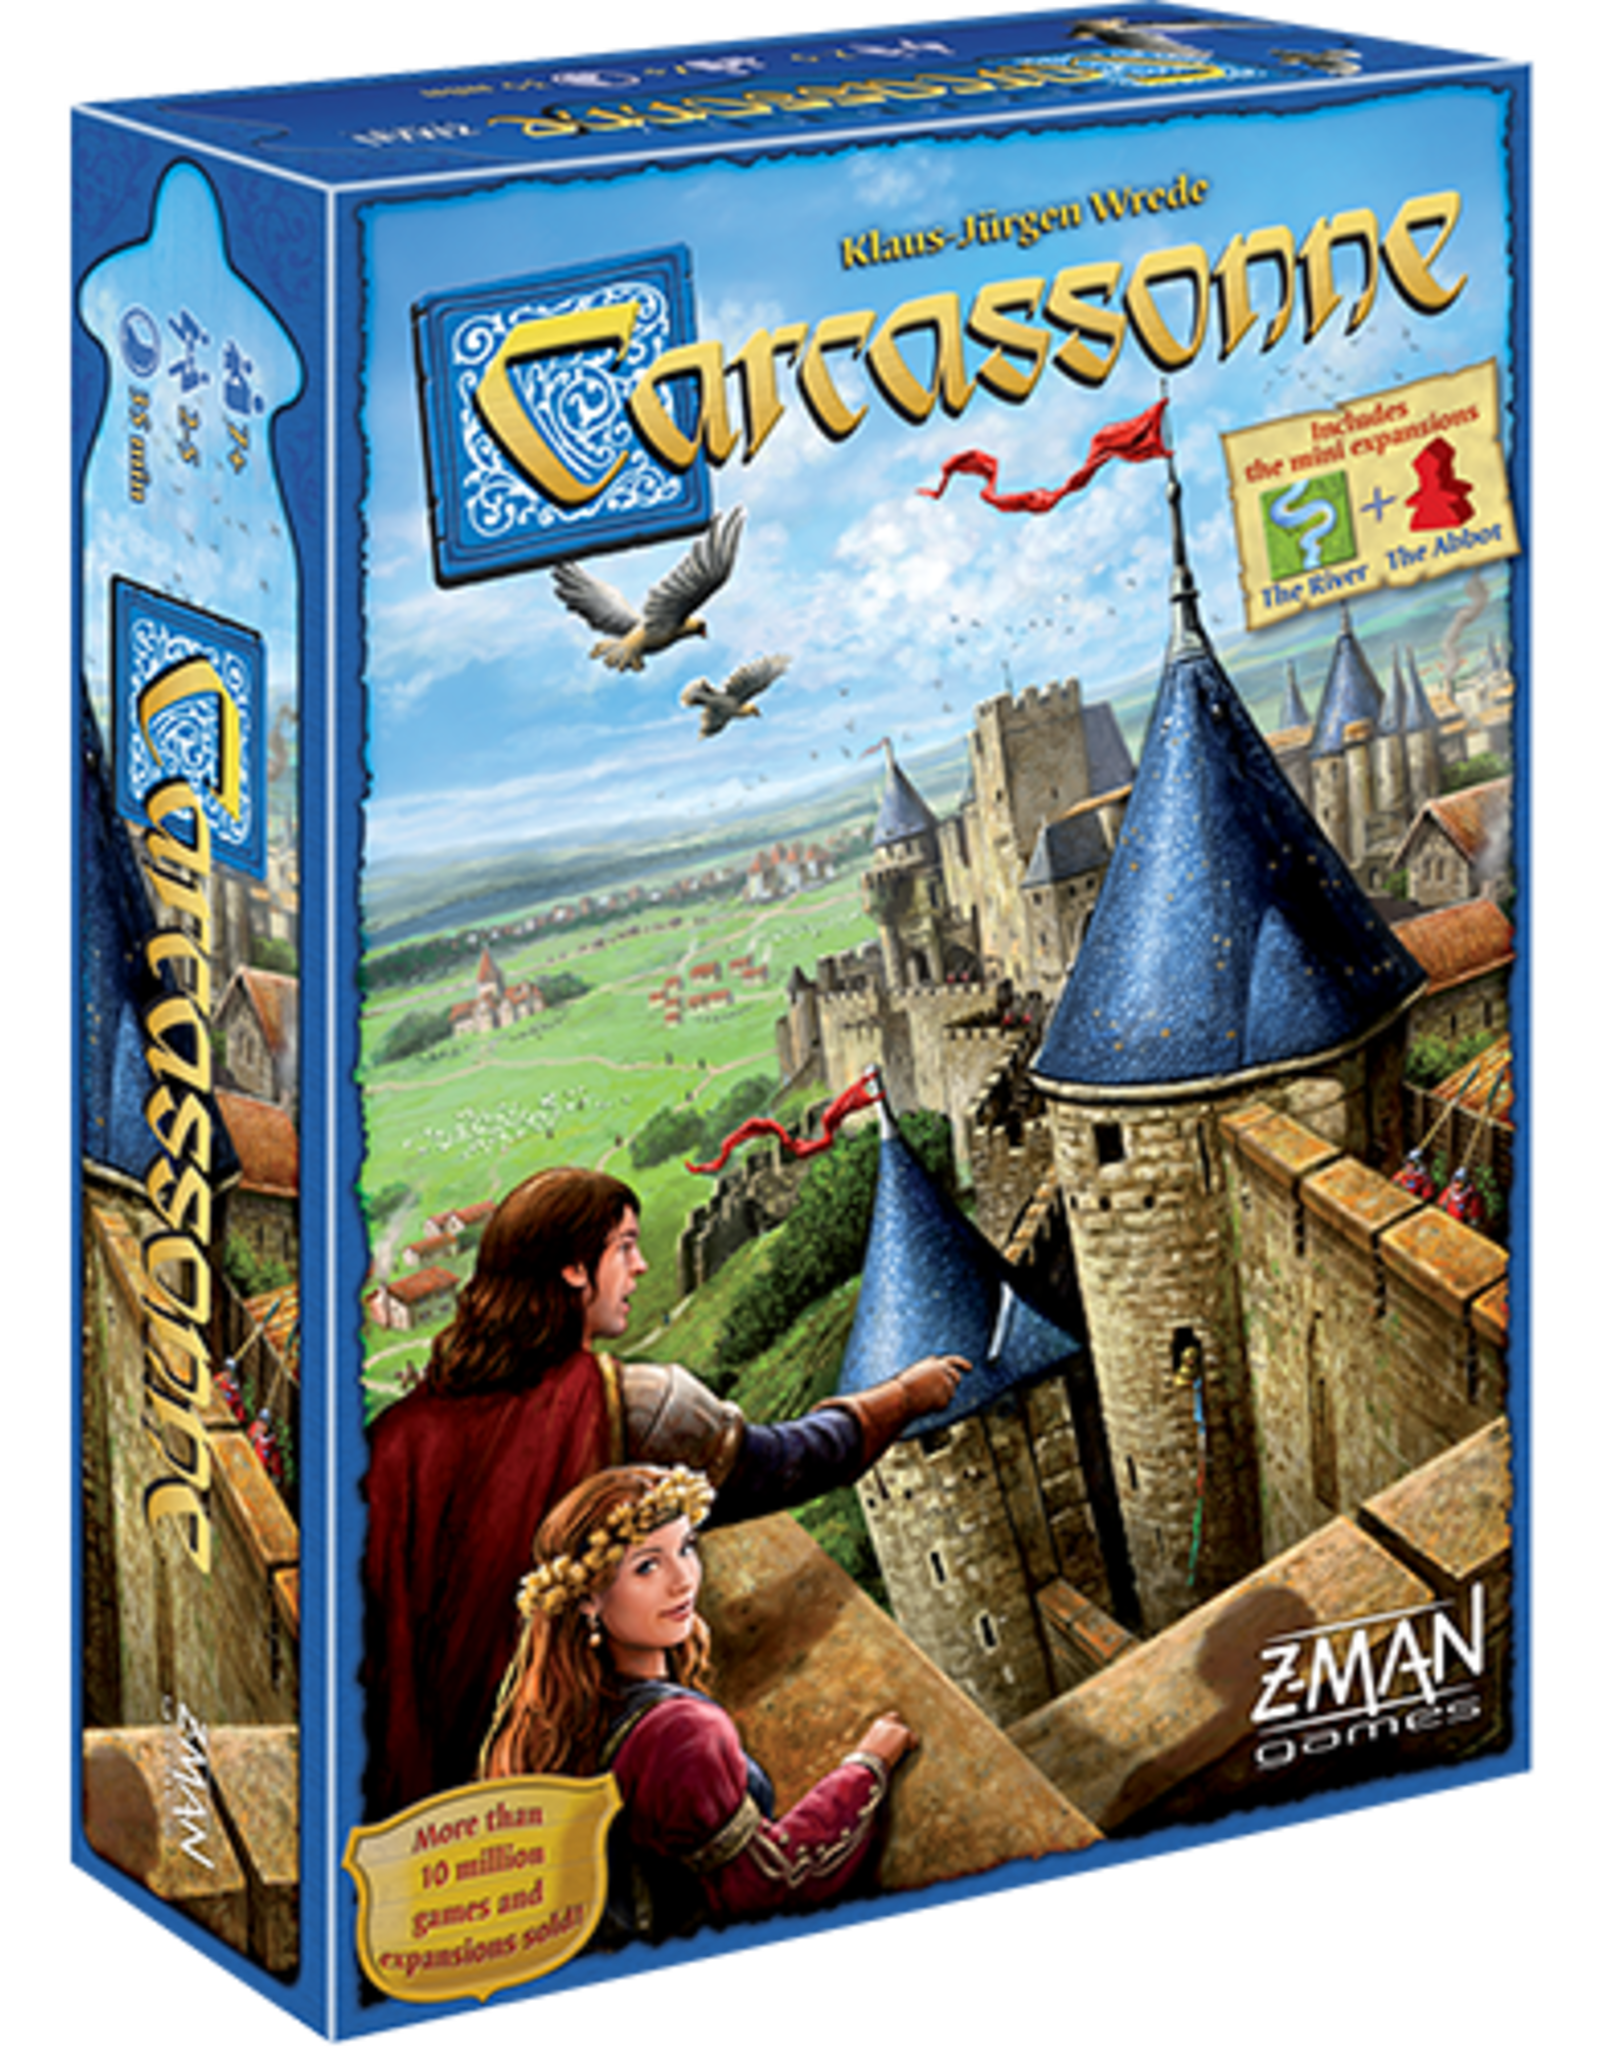 Z-Man Games Carcassonne New Edition